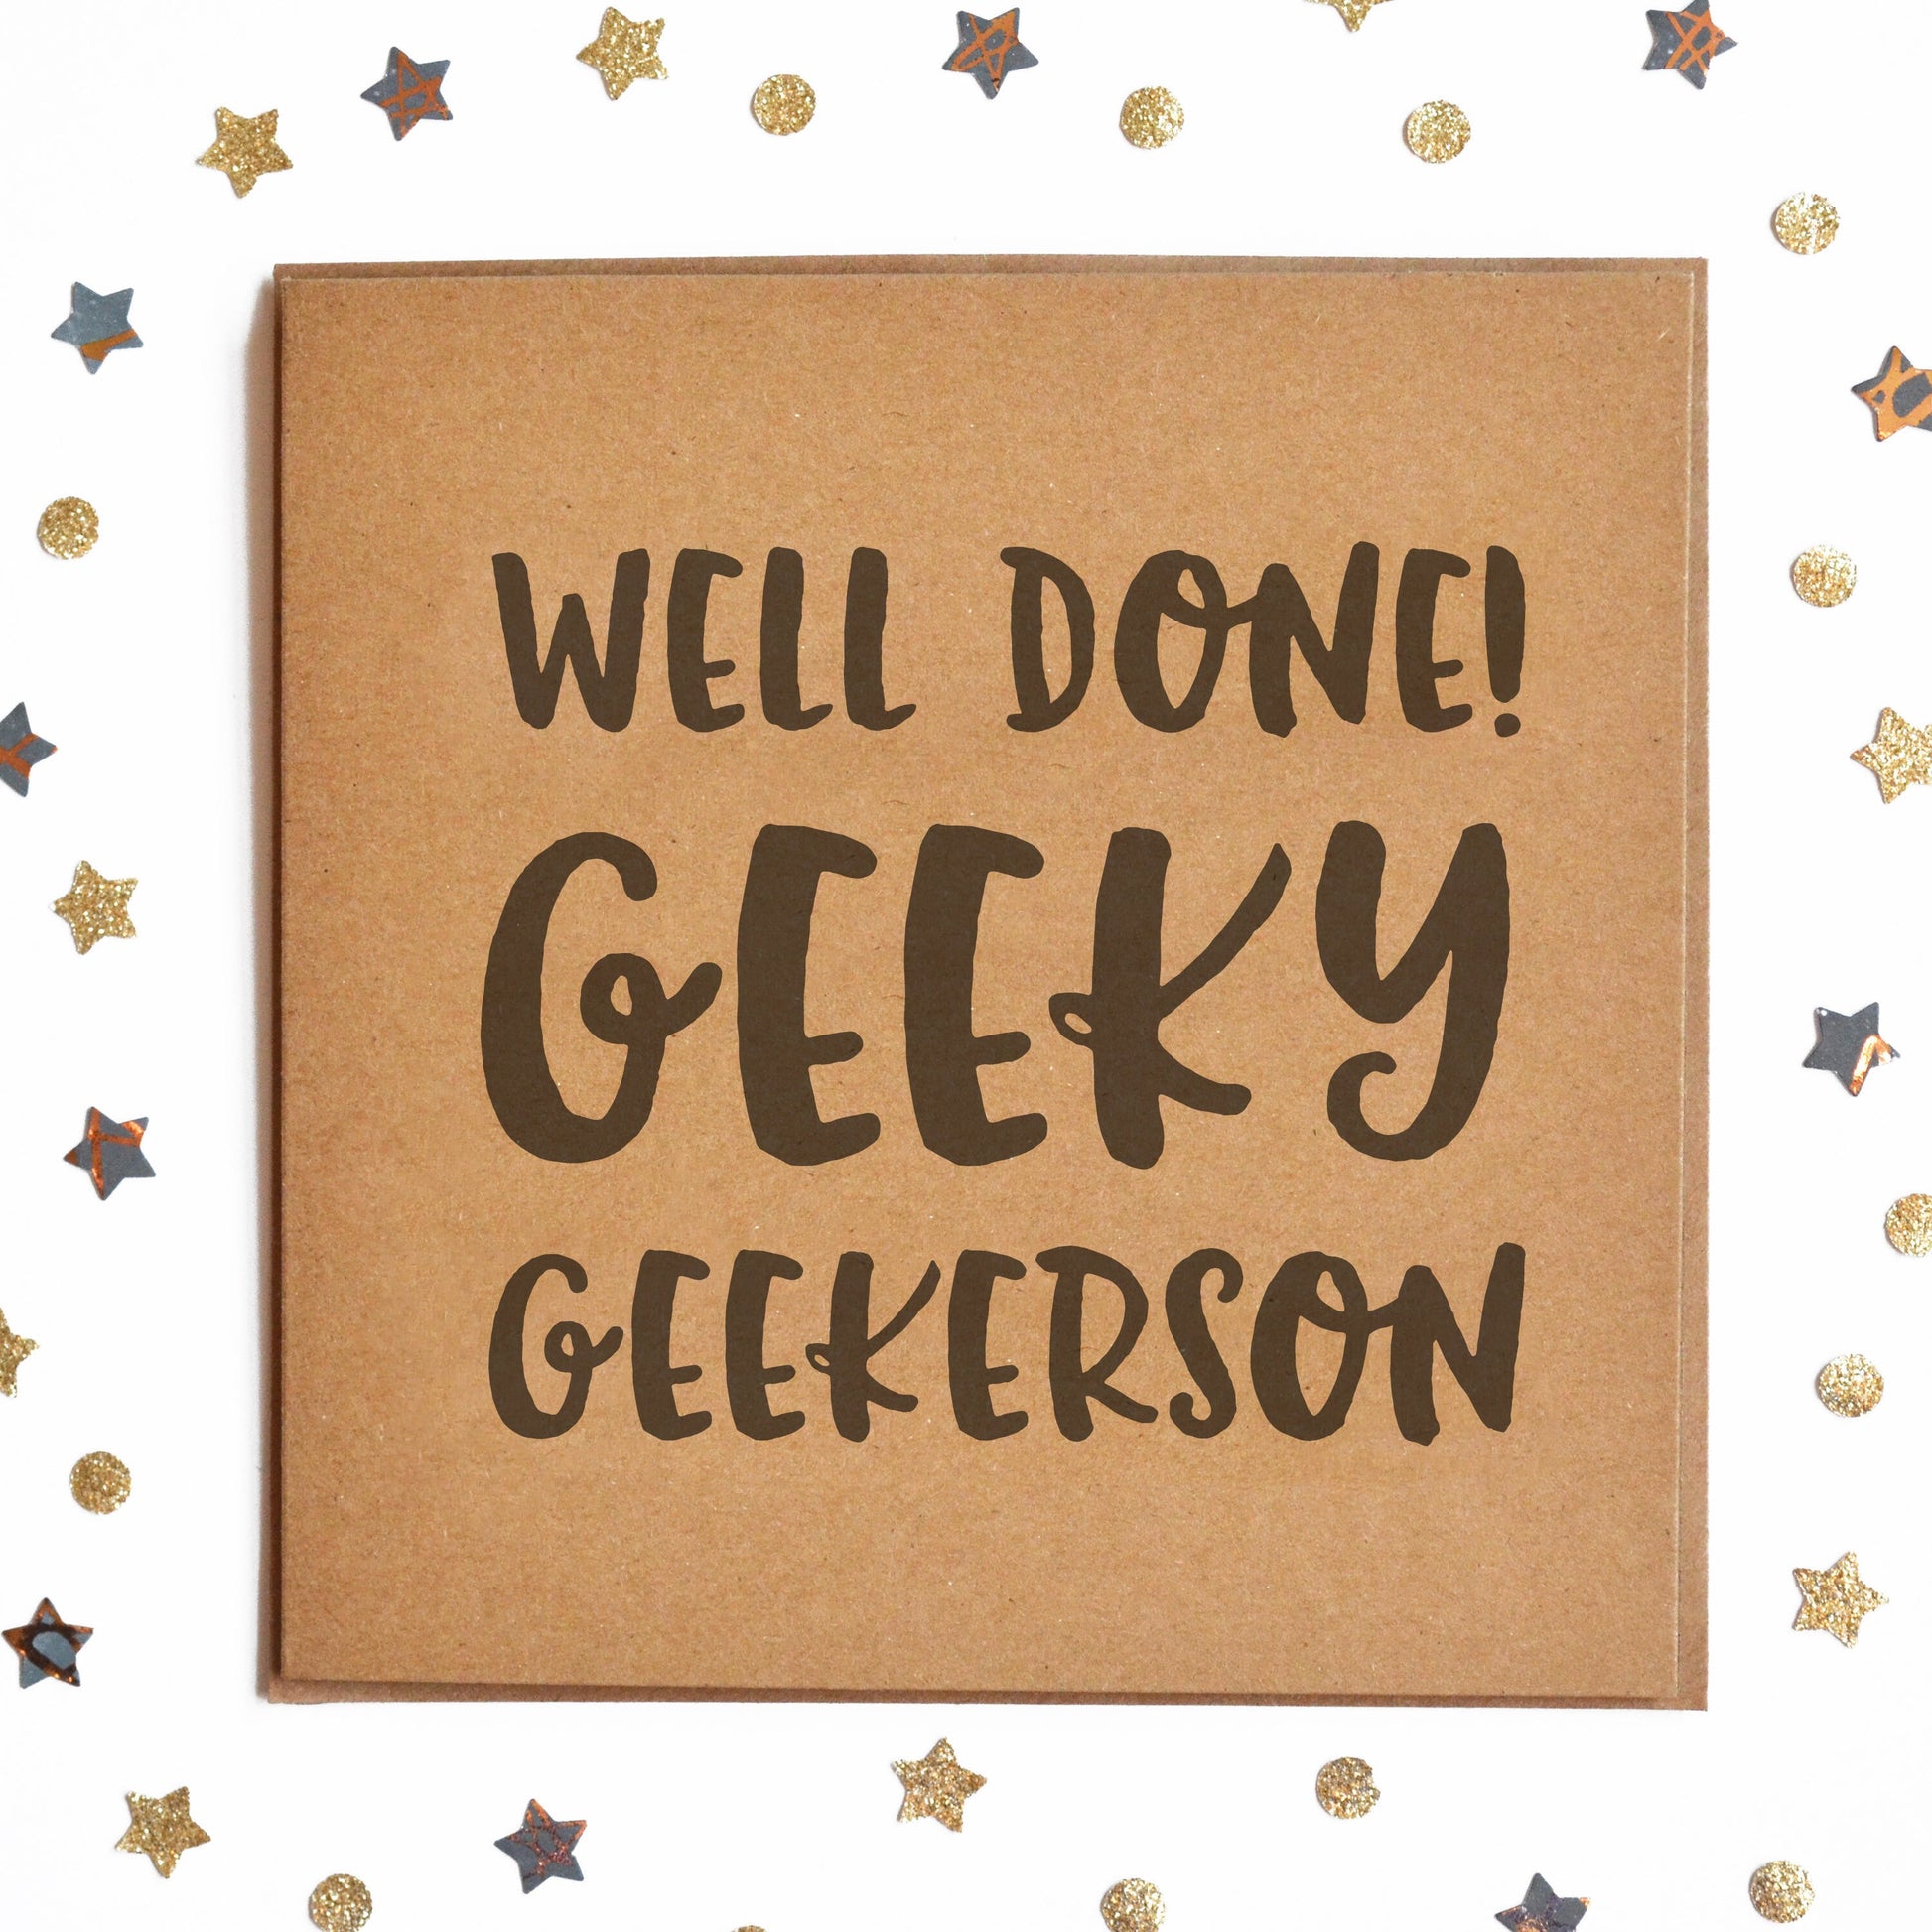 Funny Congratulations Card with the message "Well Done Geeky Geekerson".